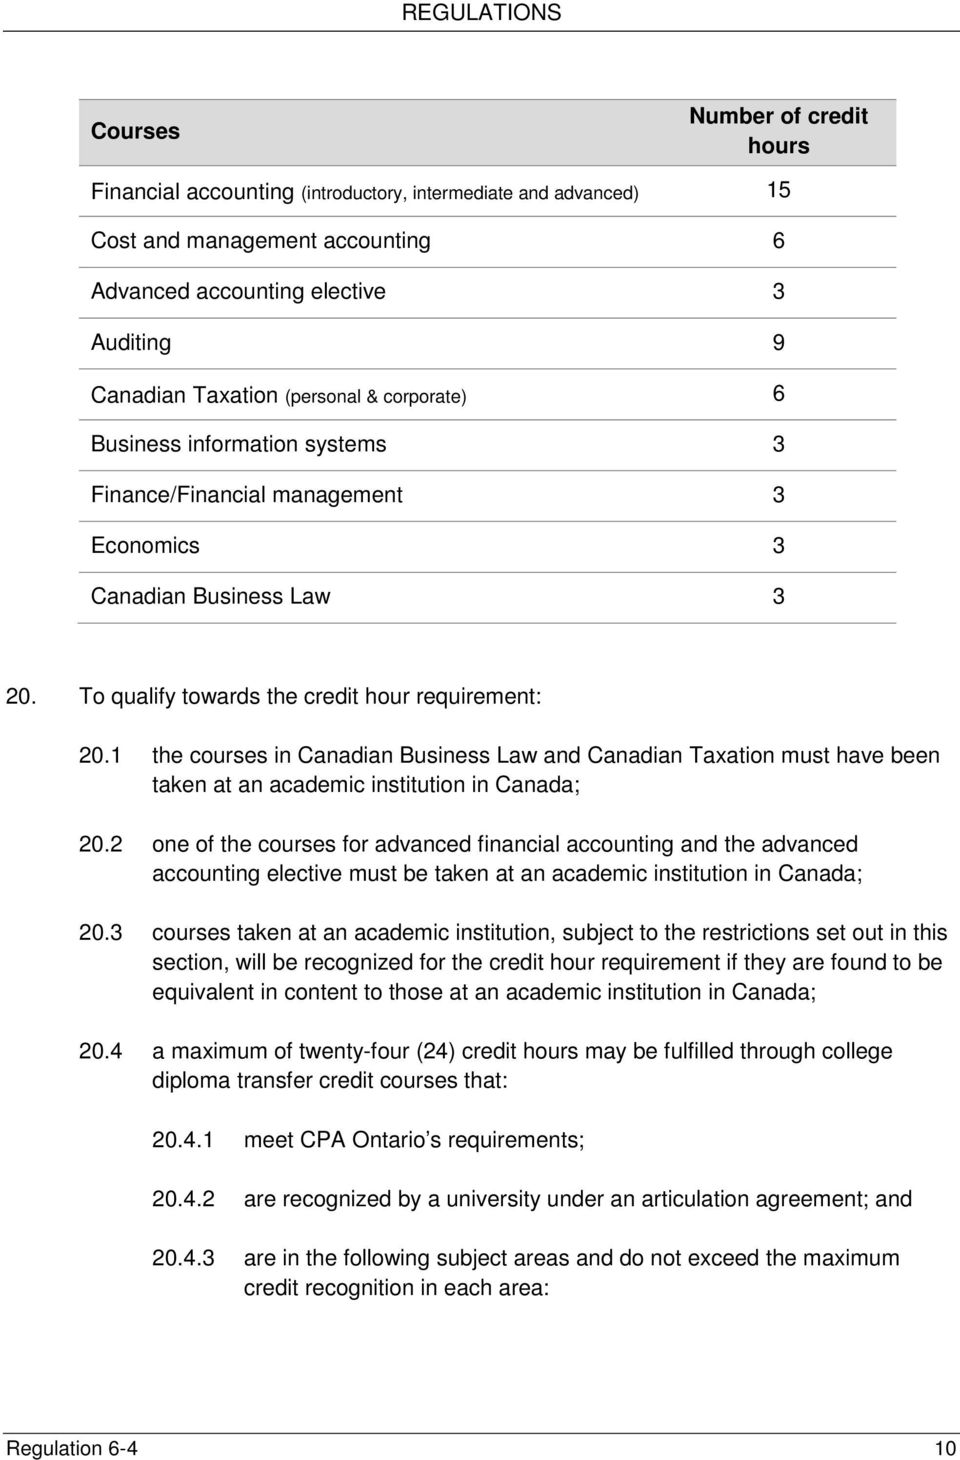 1 the courses in Canadian Business Law and Canadian Taxation must have been taken at an academic institution in Canada; 20.